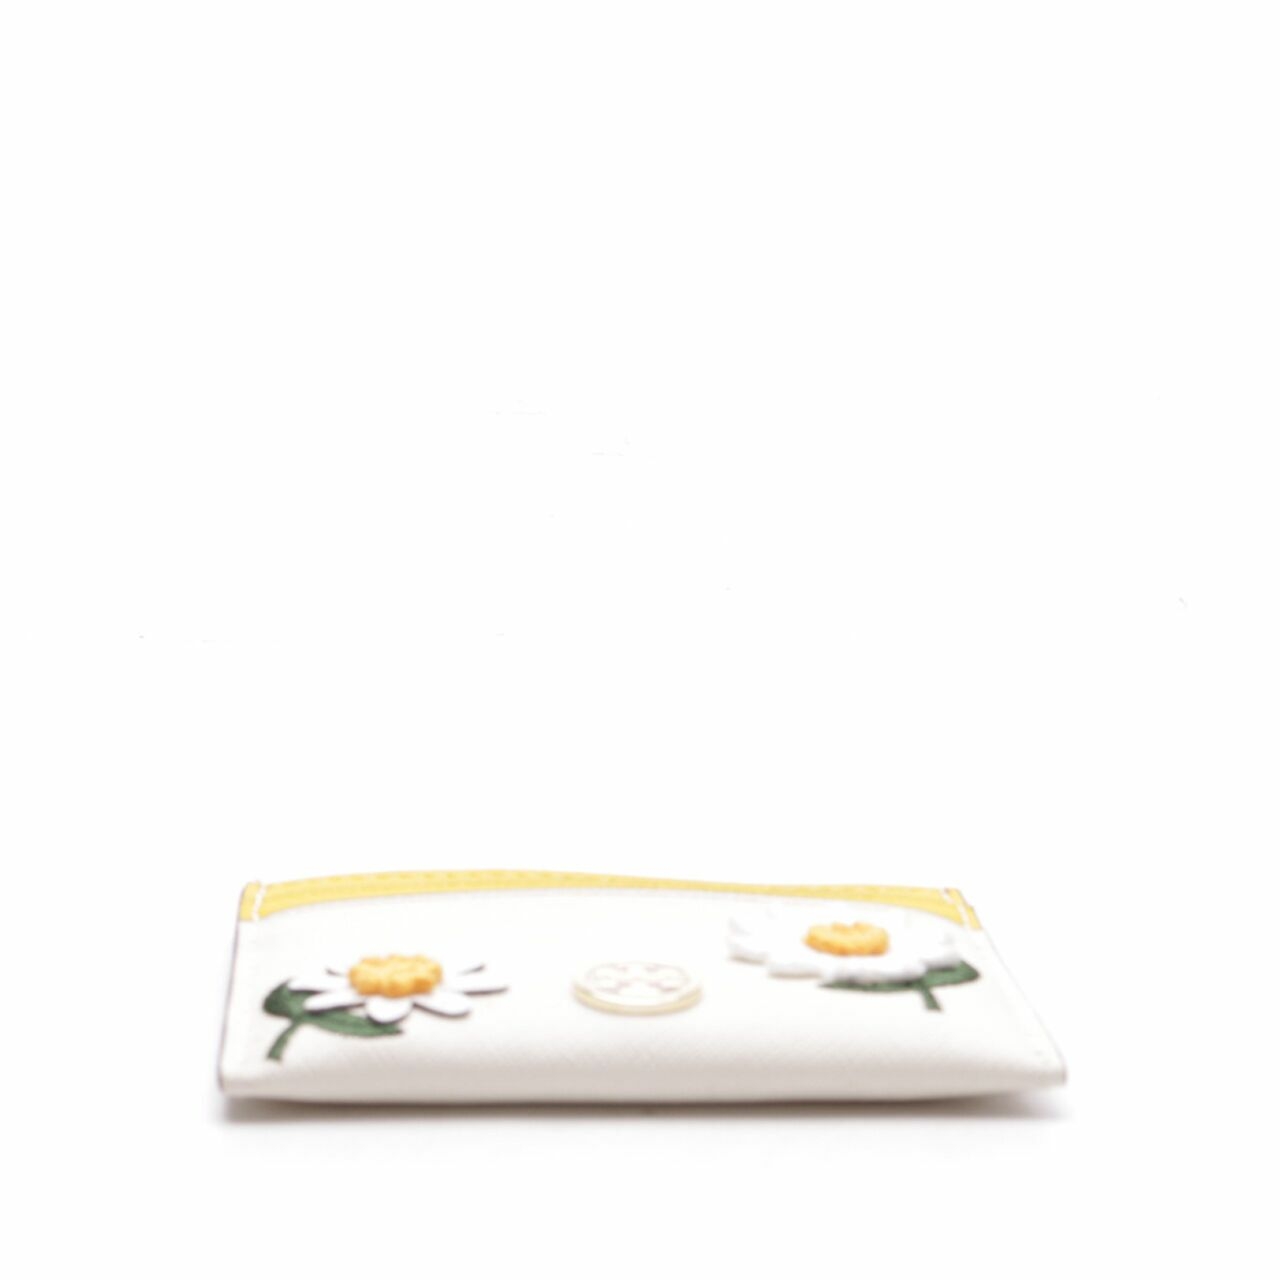 Tory Burch Robinson Floral Embroidered Card Case